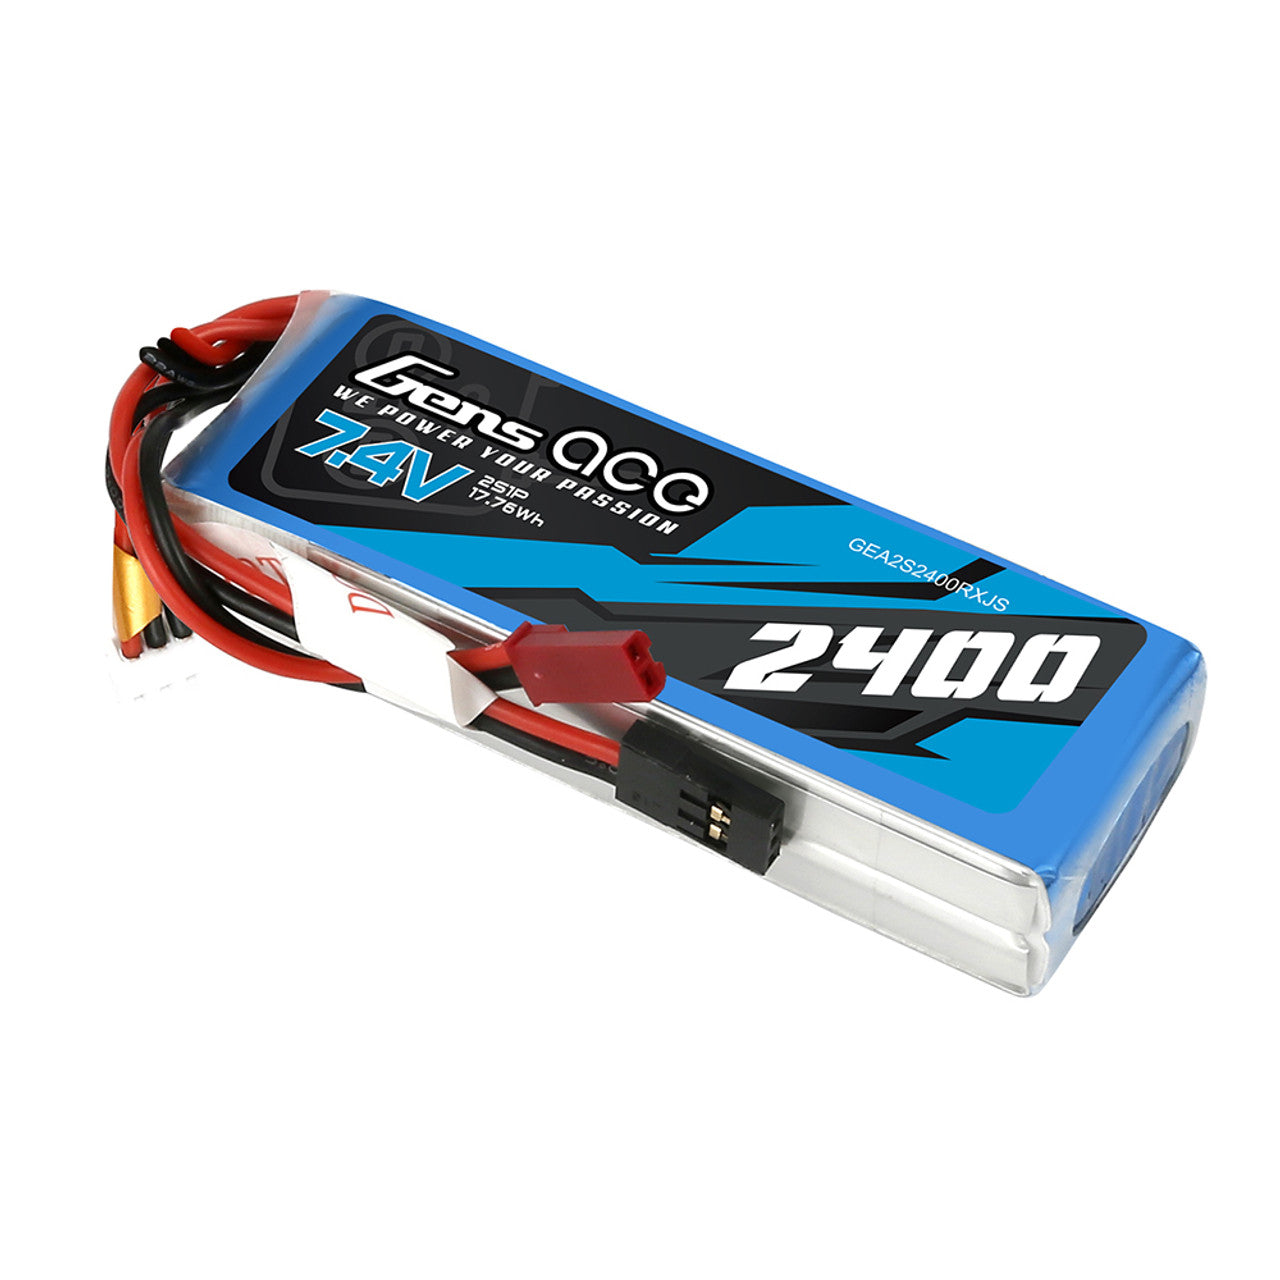 Gens Ace 2400mAh 7.4V RX 2S1P Lipo Battery Pack with JST-SYP plug